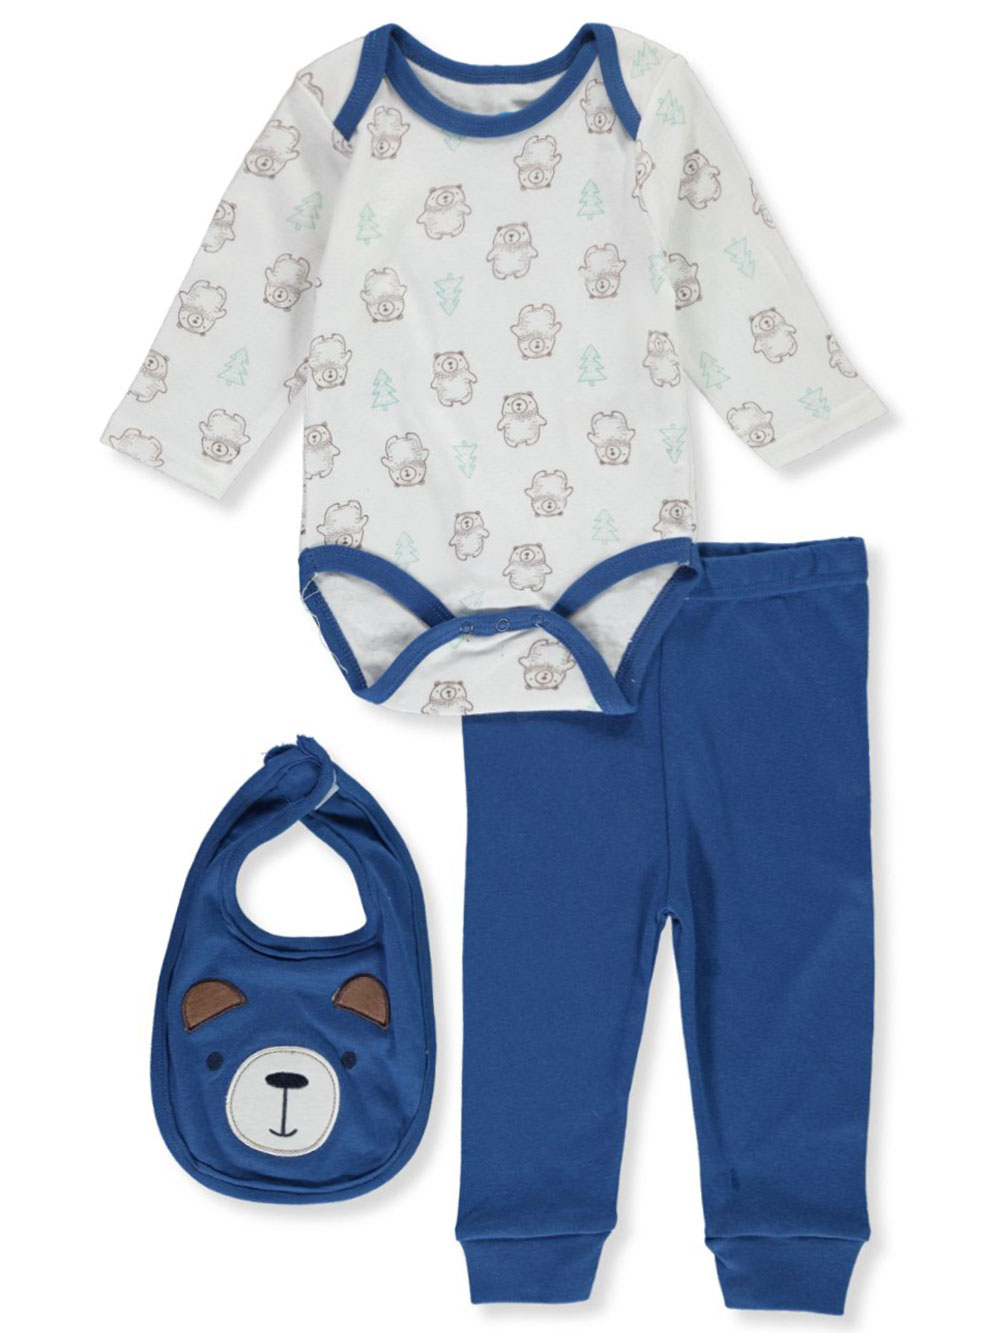 Boys White and Navy Sets